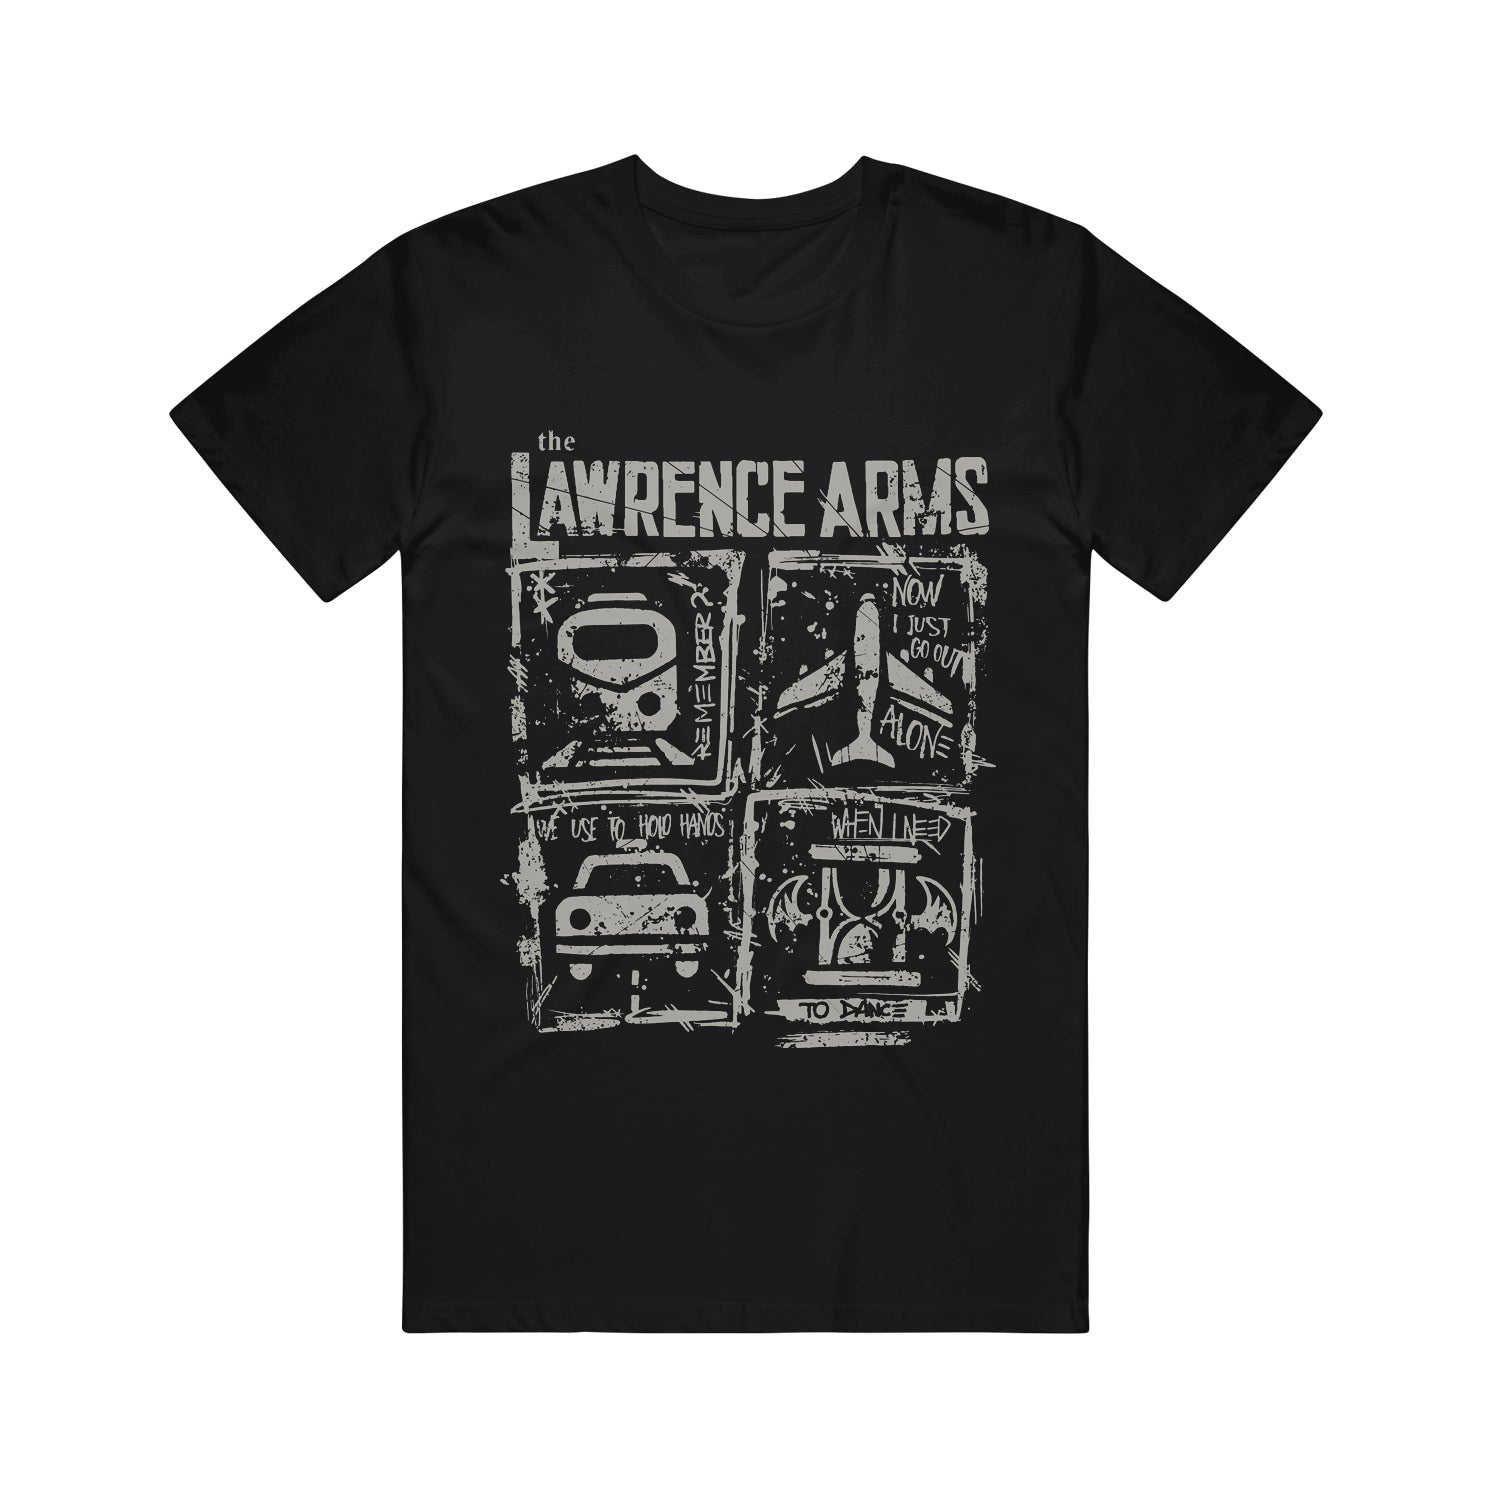 Image of a black tshirt against a white background. In grey text across the chest reads "the lawrence arms". Below that are 4 squares- the top left has graphic of a bus with the word "remember?", below that is a car and the words "we use to hold hands", the top right has a plane and the words "now I just go out alone", and the bottom right an hourglass with wings and the words "when I need to dance". This is also all in grey.